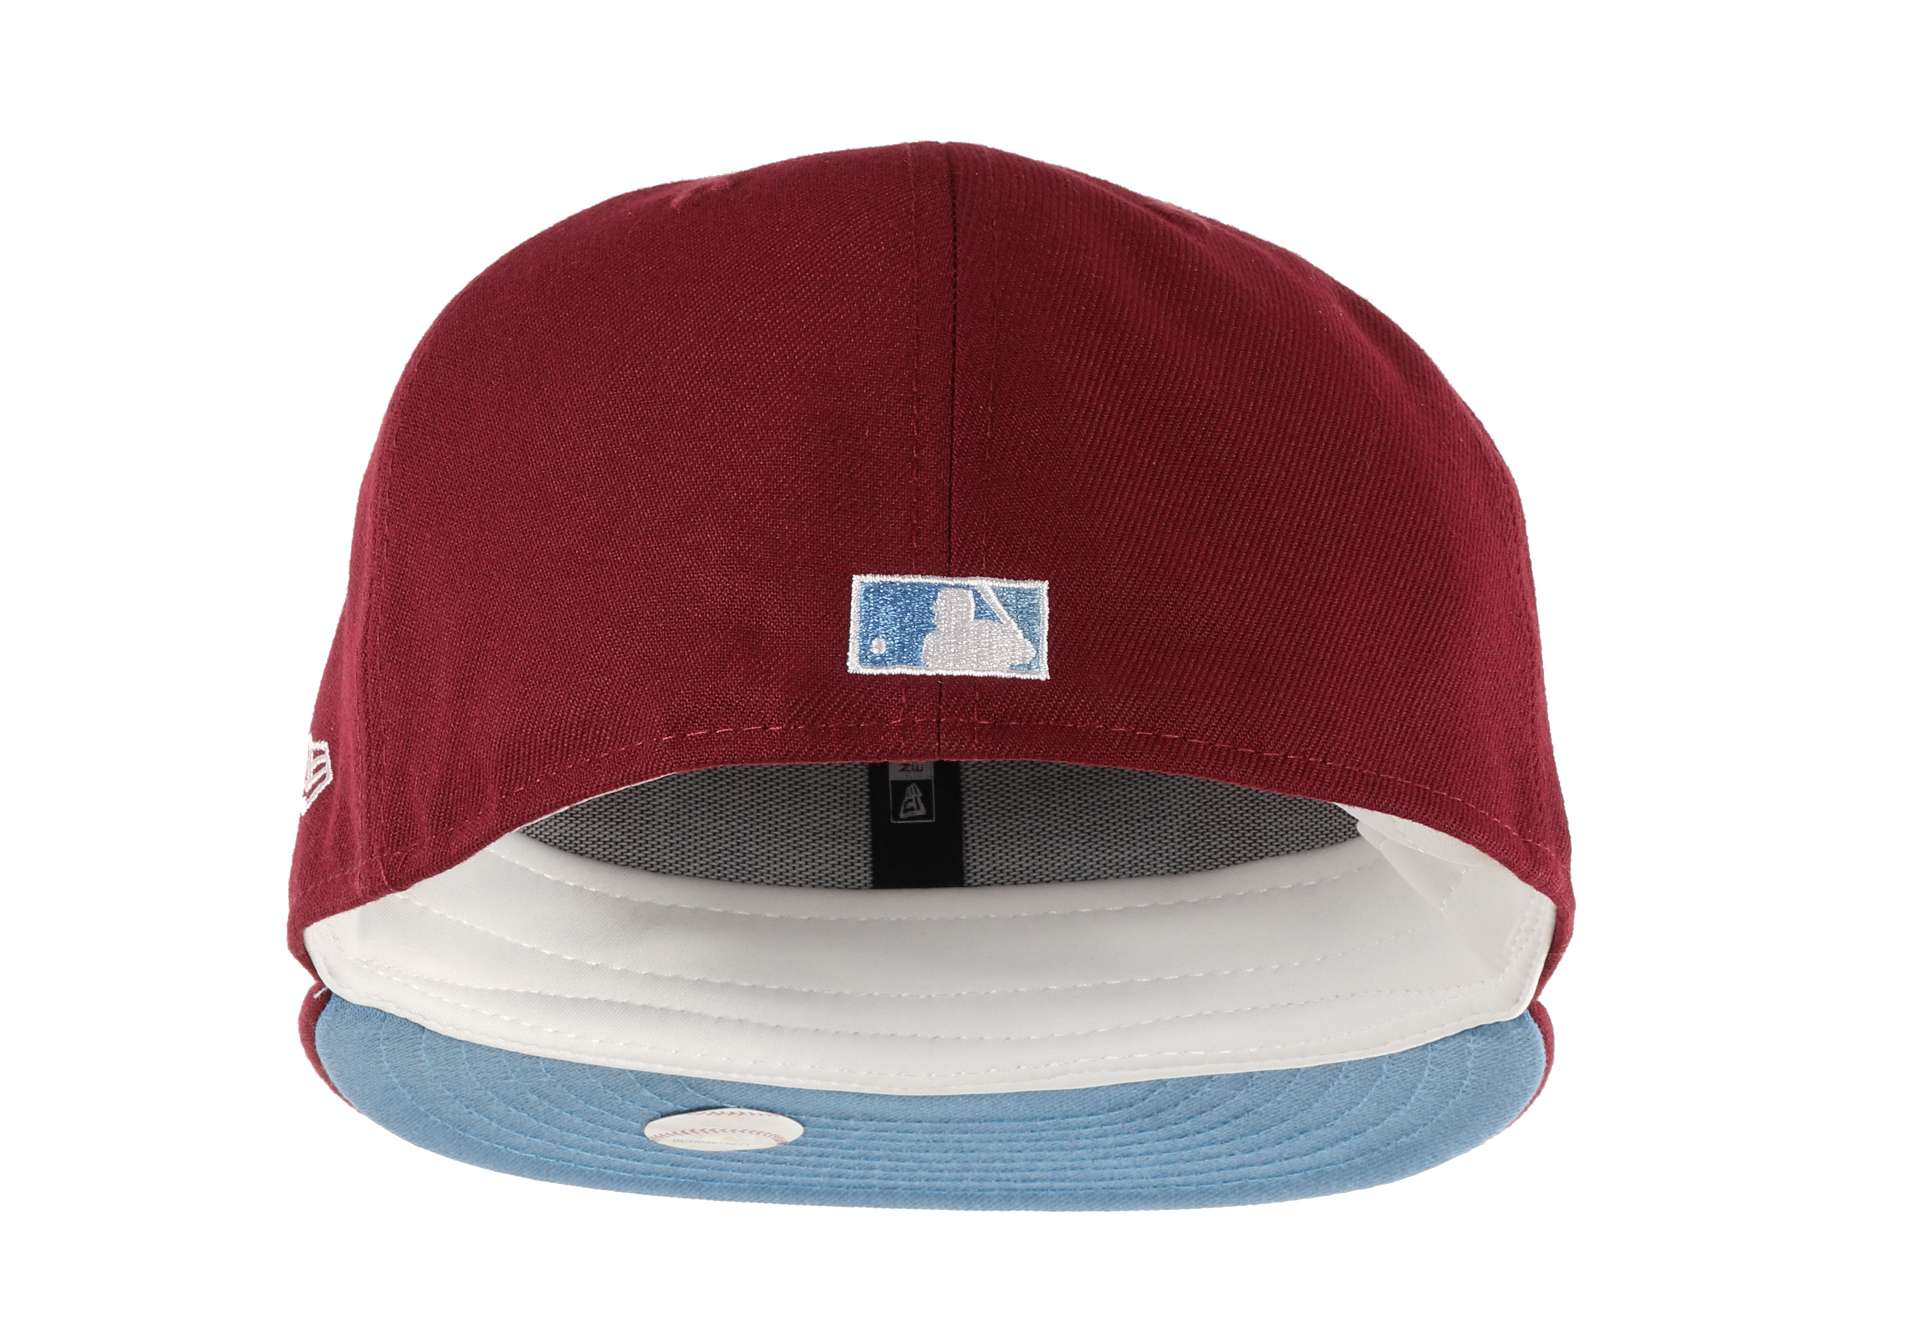 New York Mets MLB Cooperstown World Series 2000 Maroon Blue 59Fifty Basecap New Era